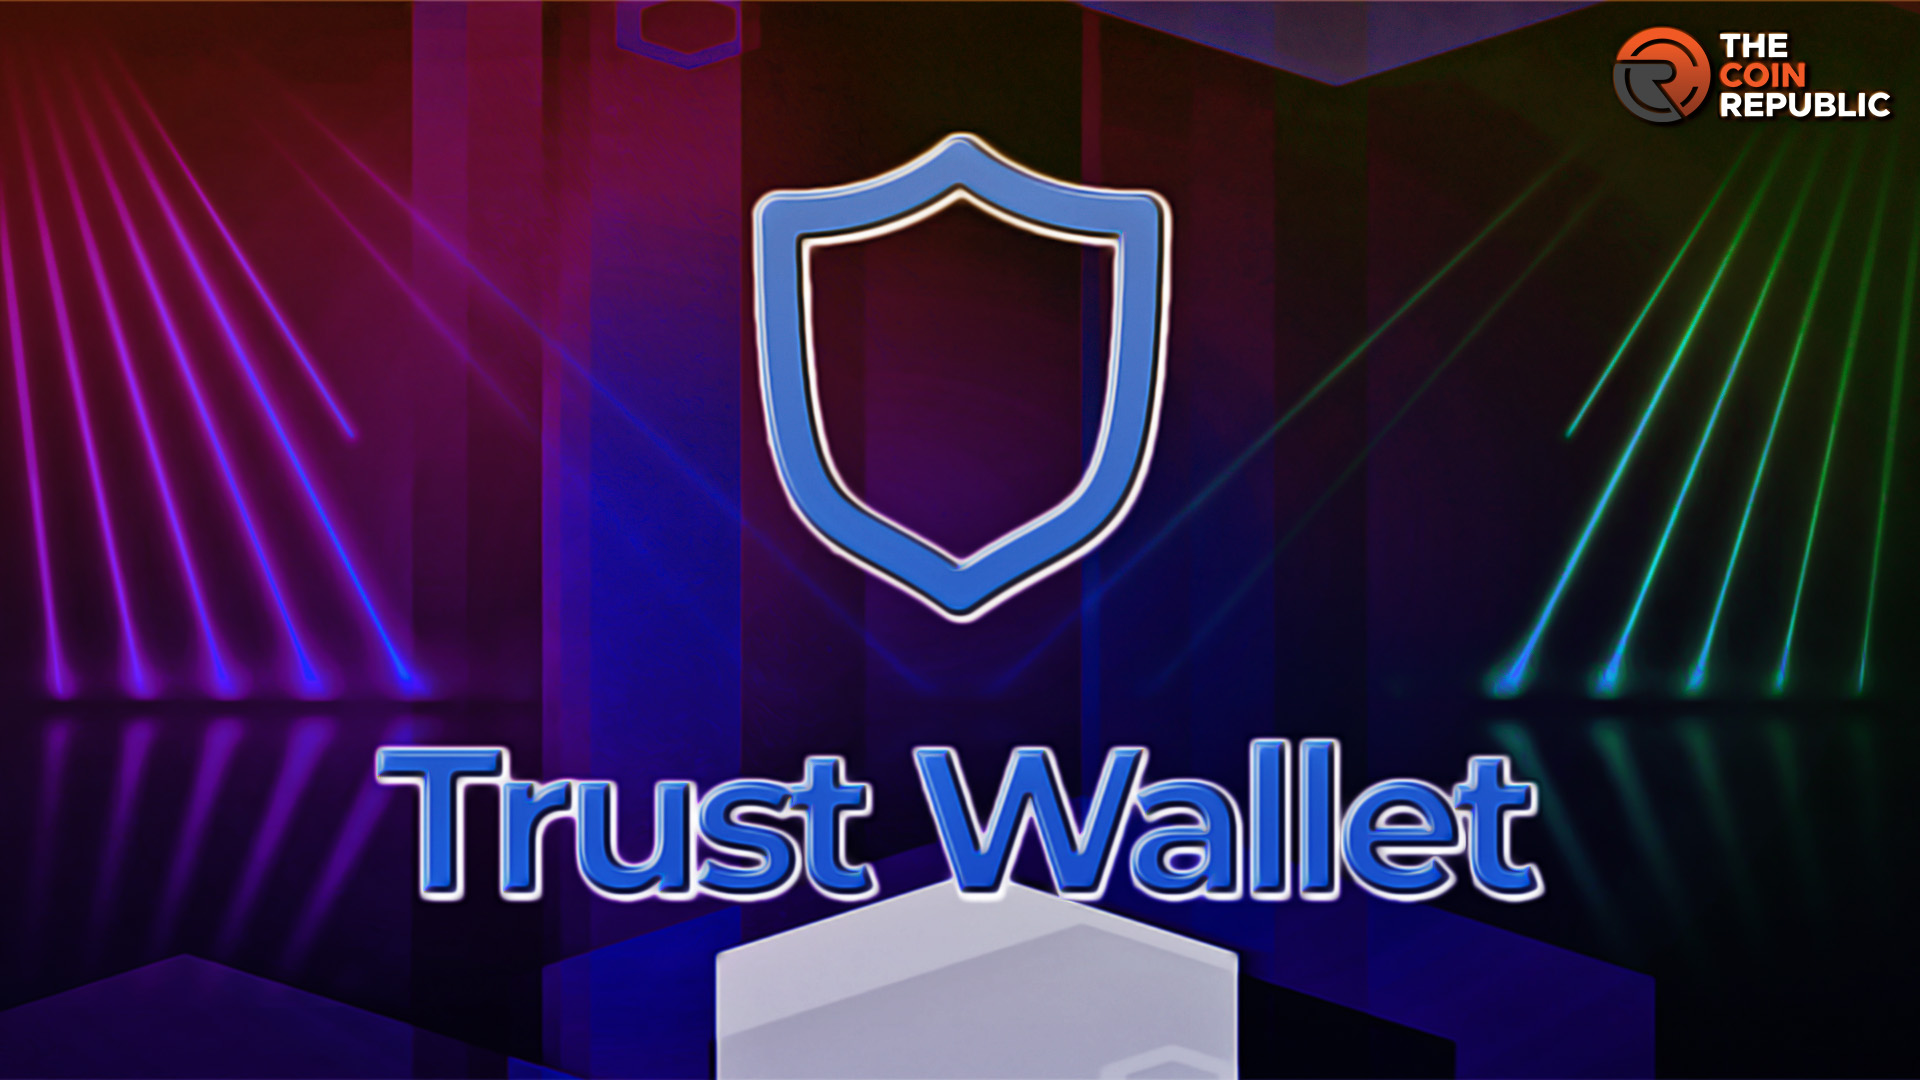 The Essentials of Trust Wallet That Every Crypto Should Know